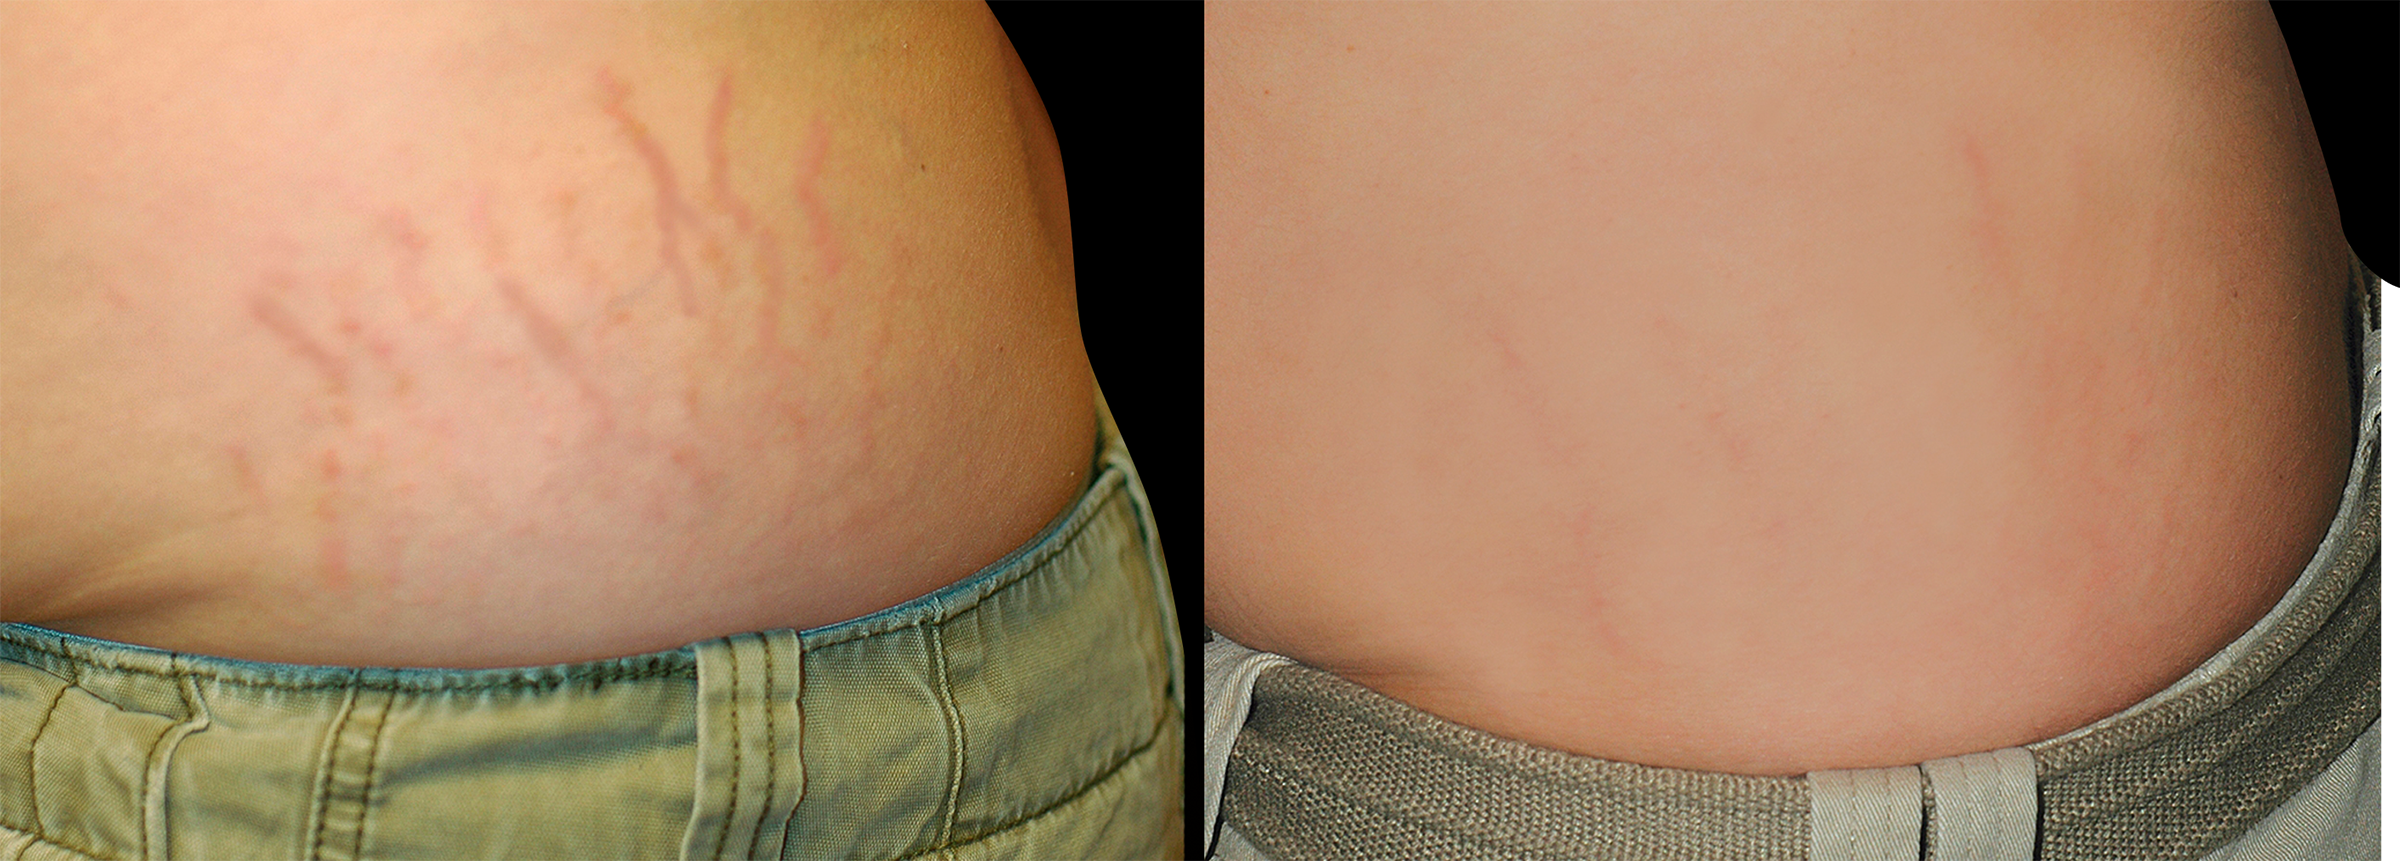 Long Island stretch mark removal before and after